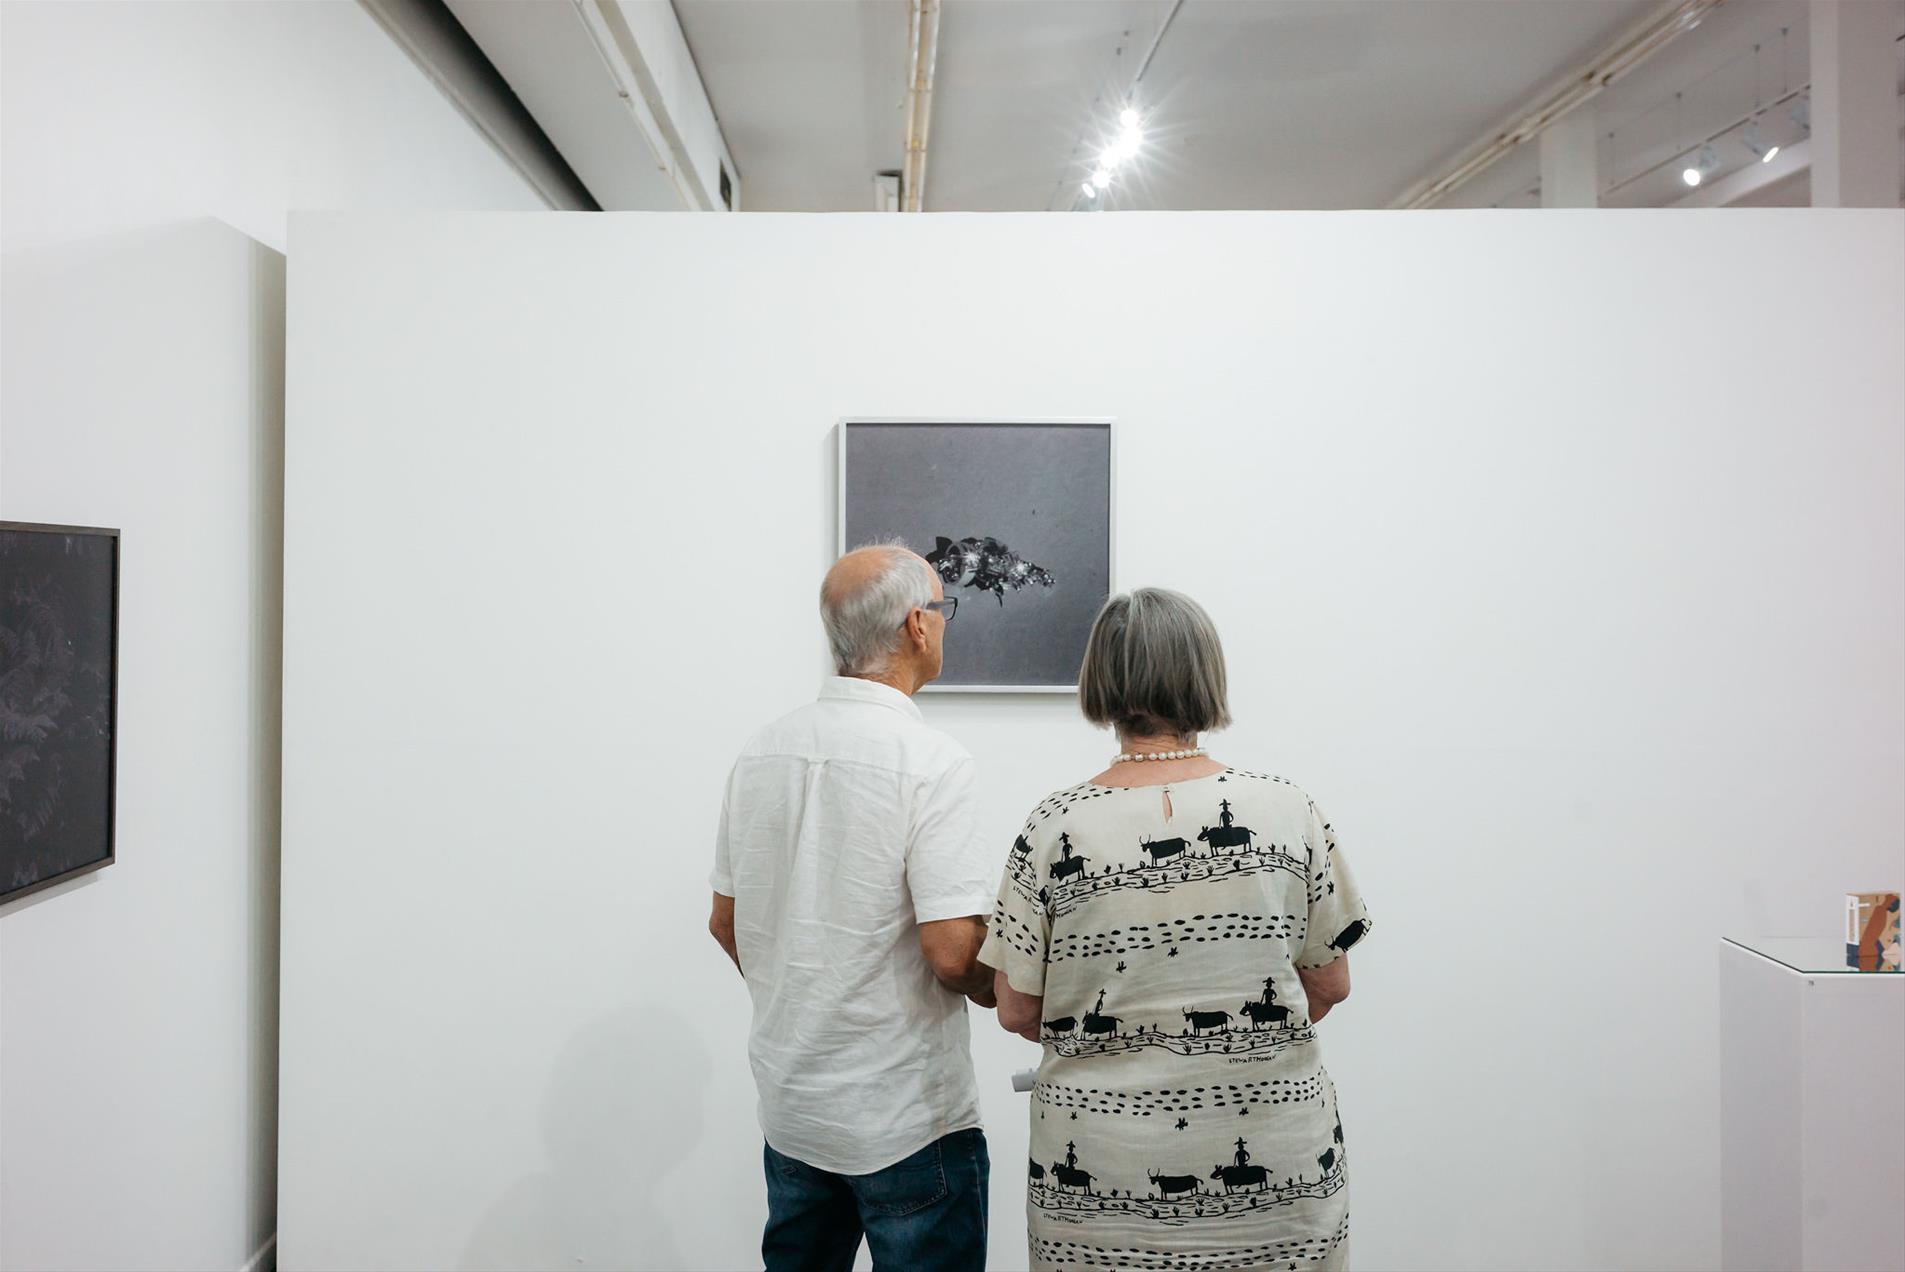 Two people standing in a gallery looking at a photograph on the wall.